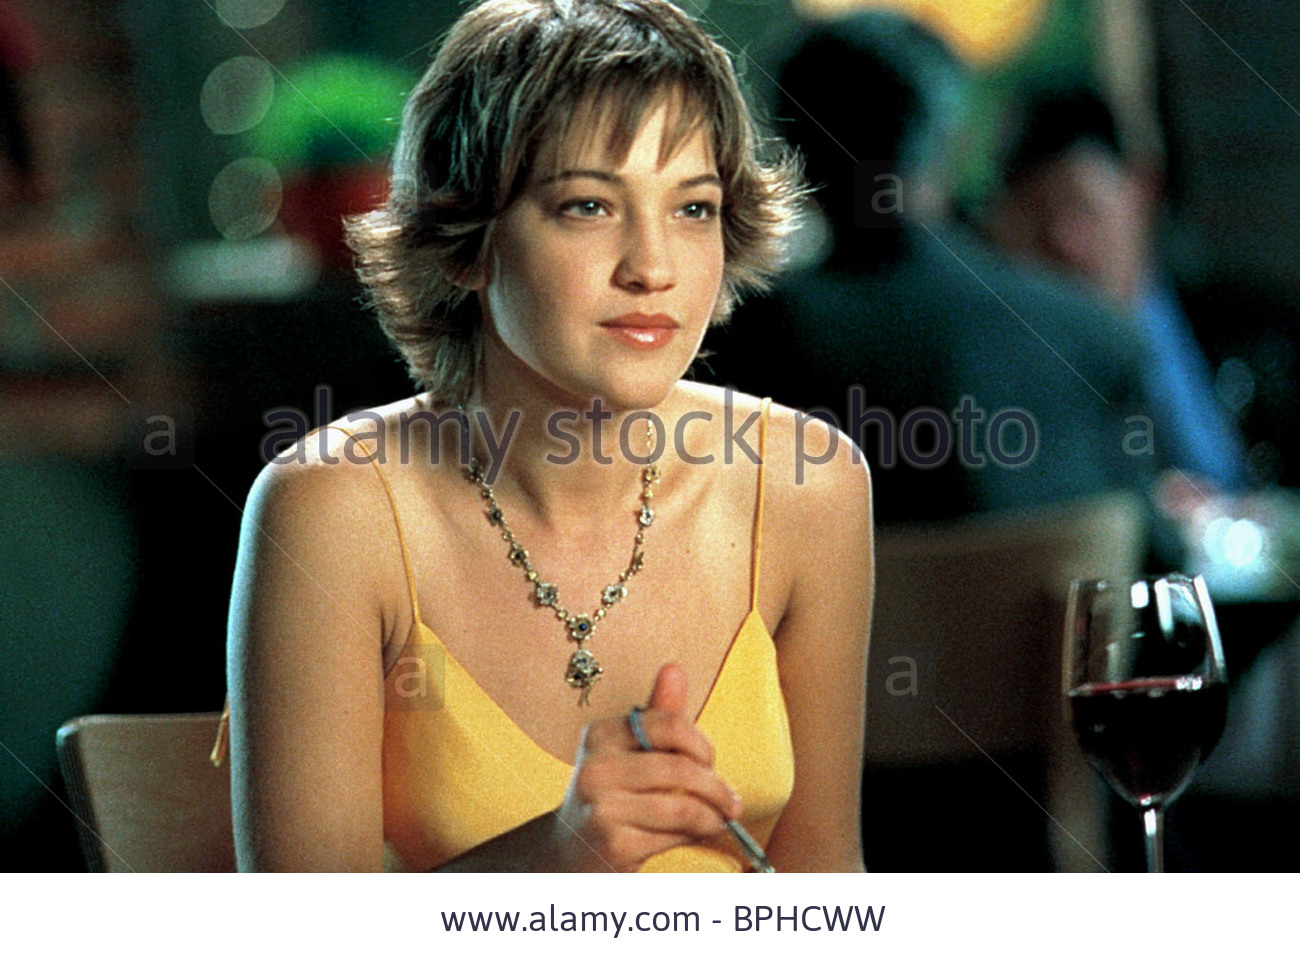 colleen-haskell-pictures